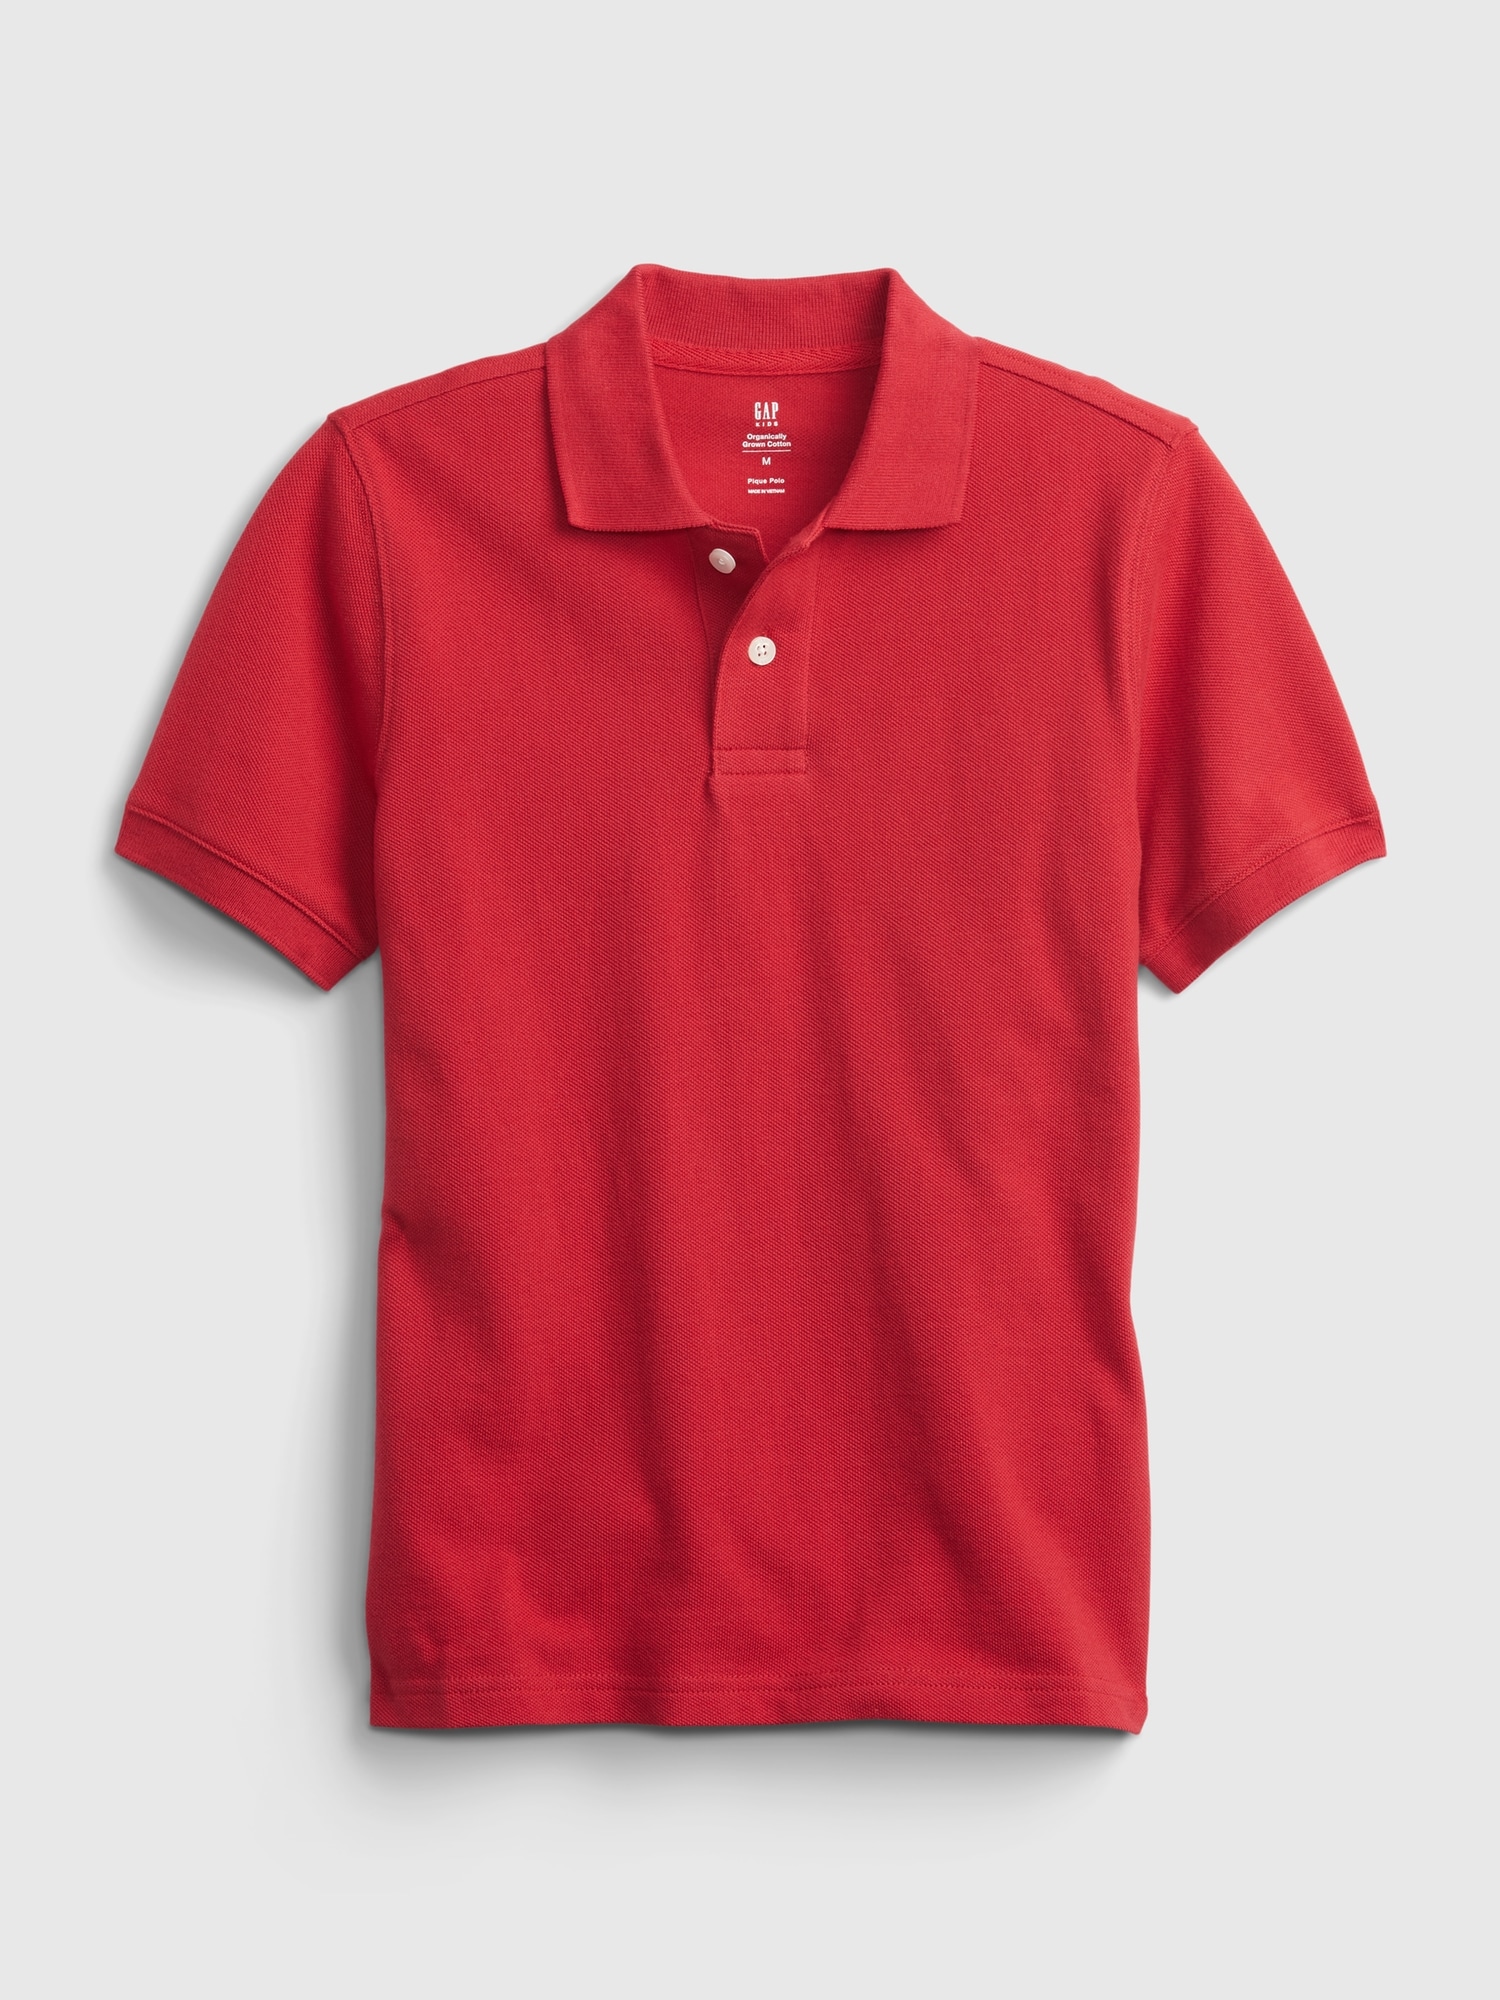 SONOMA POLO SHIRT  Poor Little Rich Boy Clothing